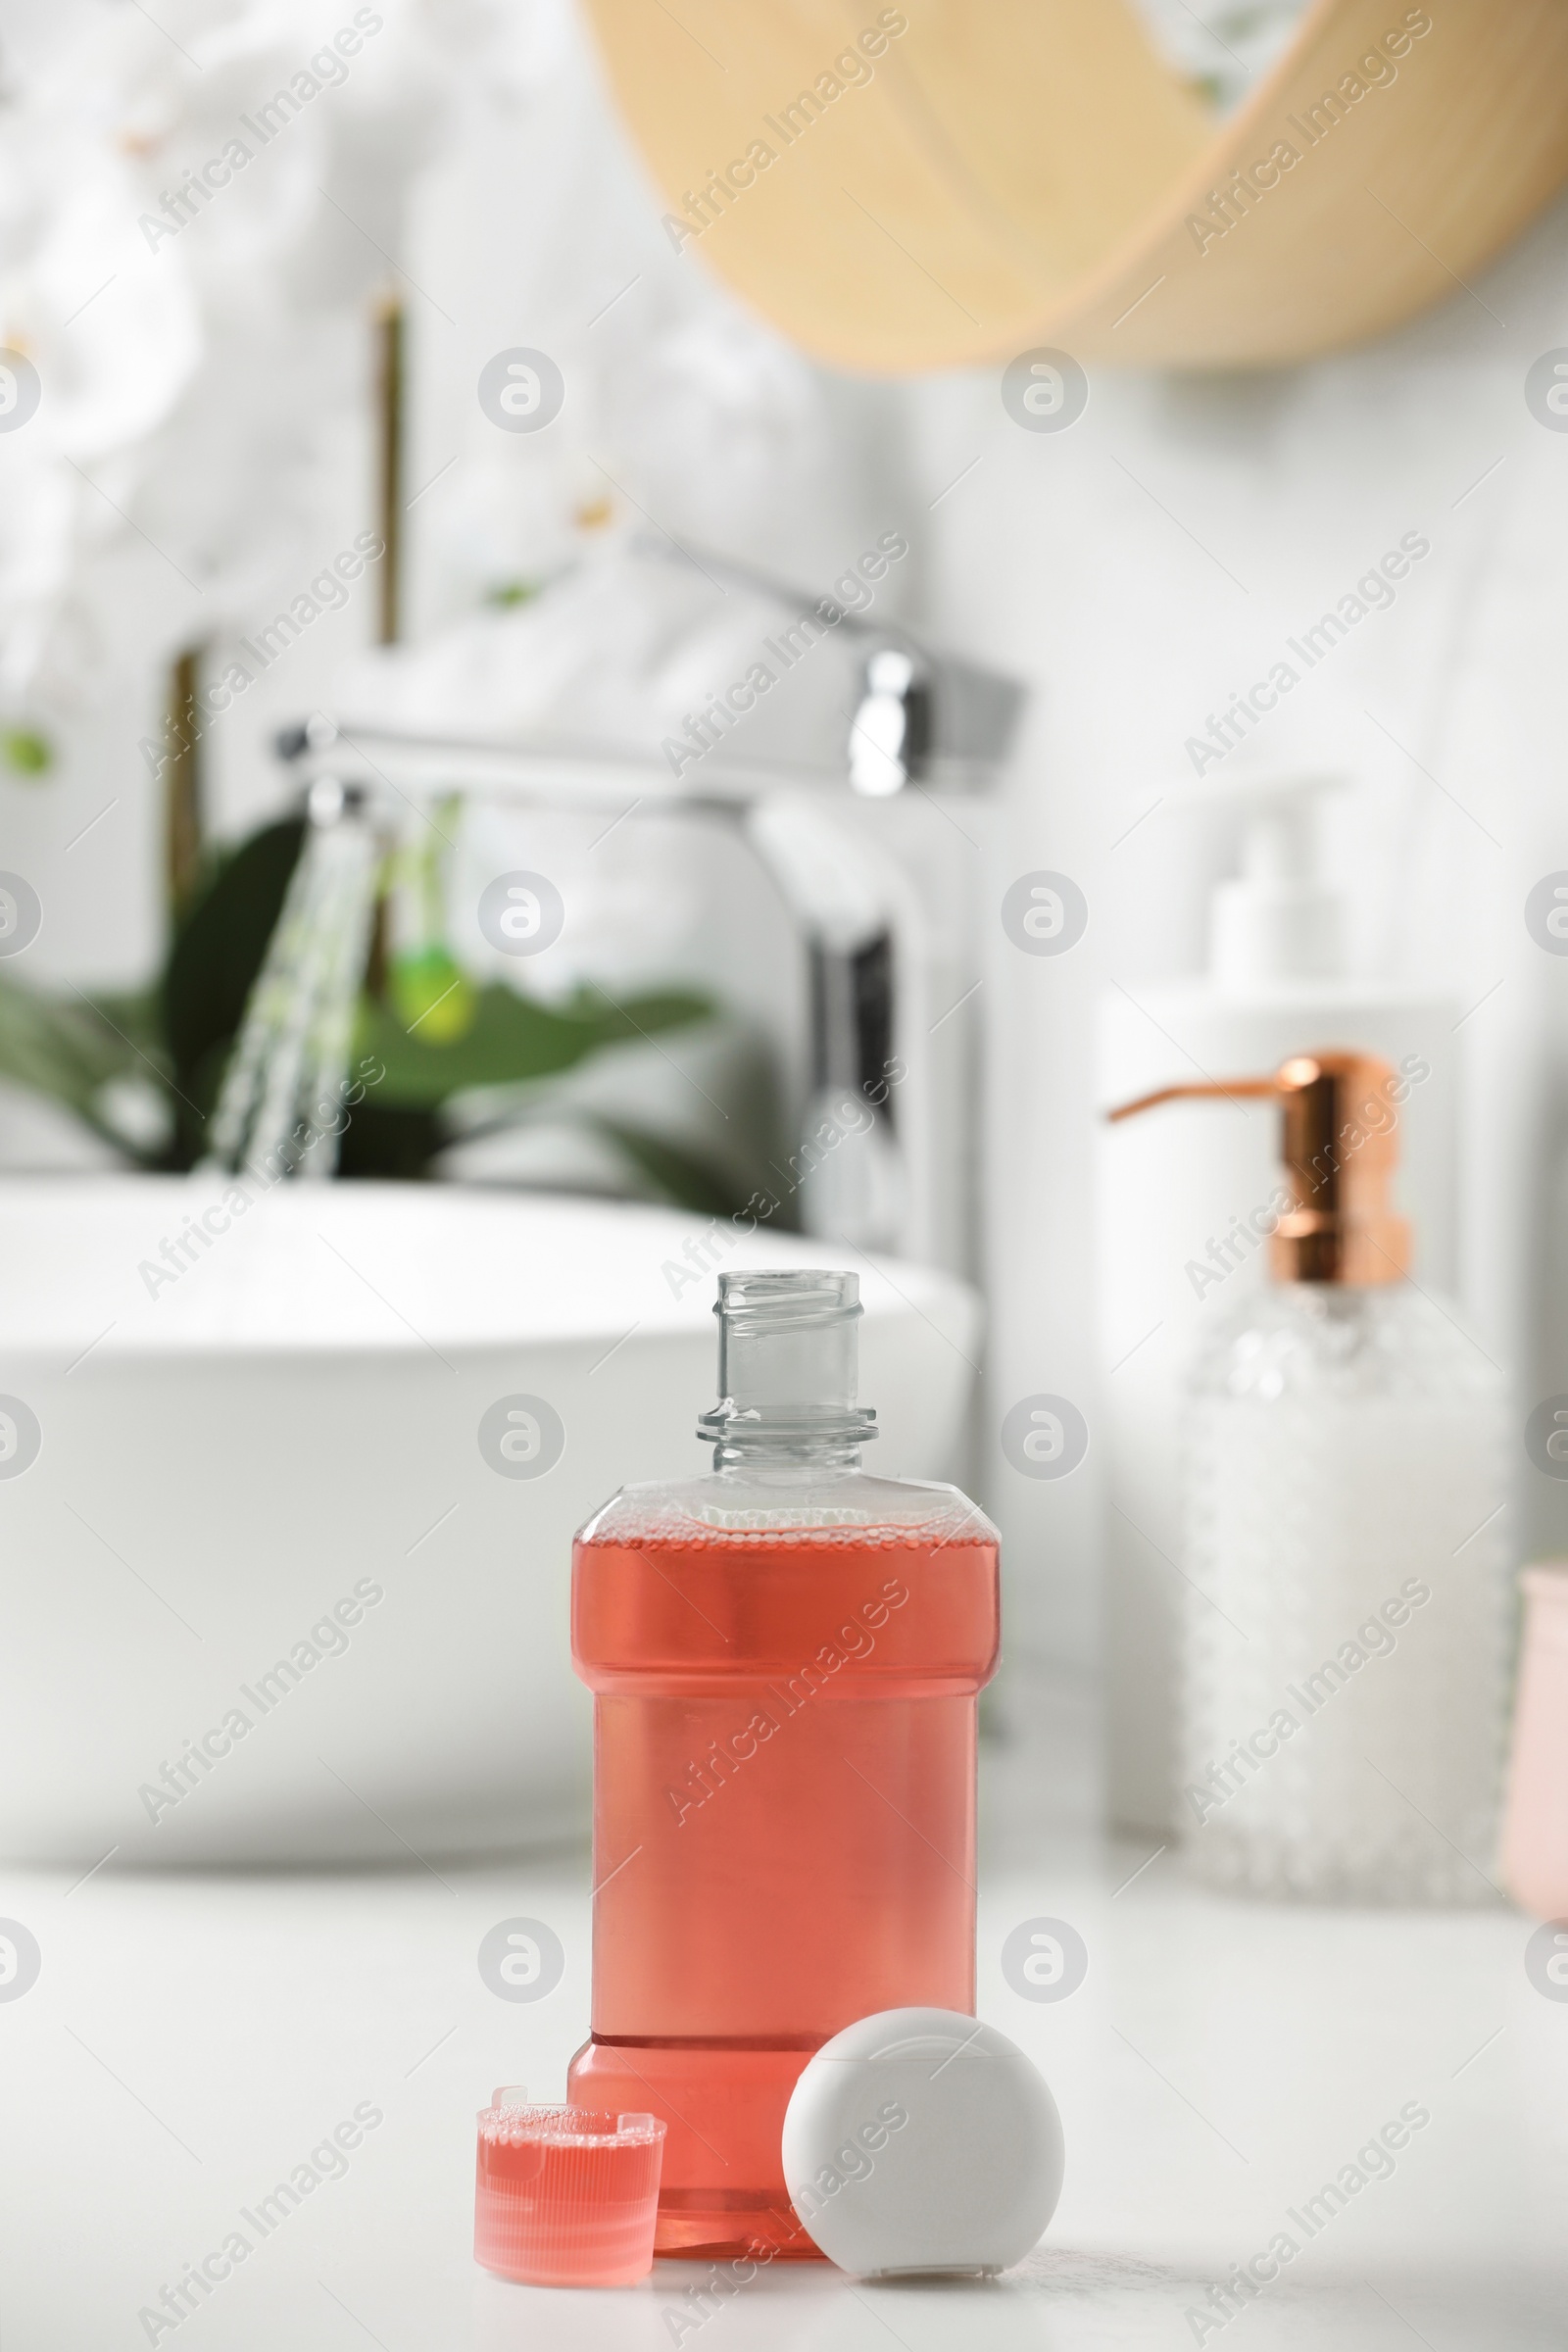 Photo of Mouthwash and dental floss on white countertop in bathroom